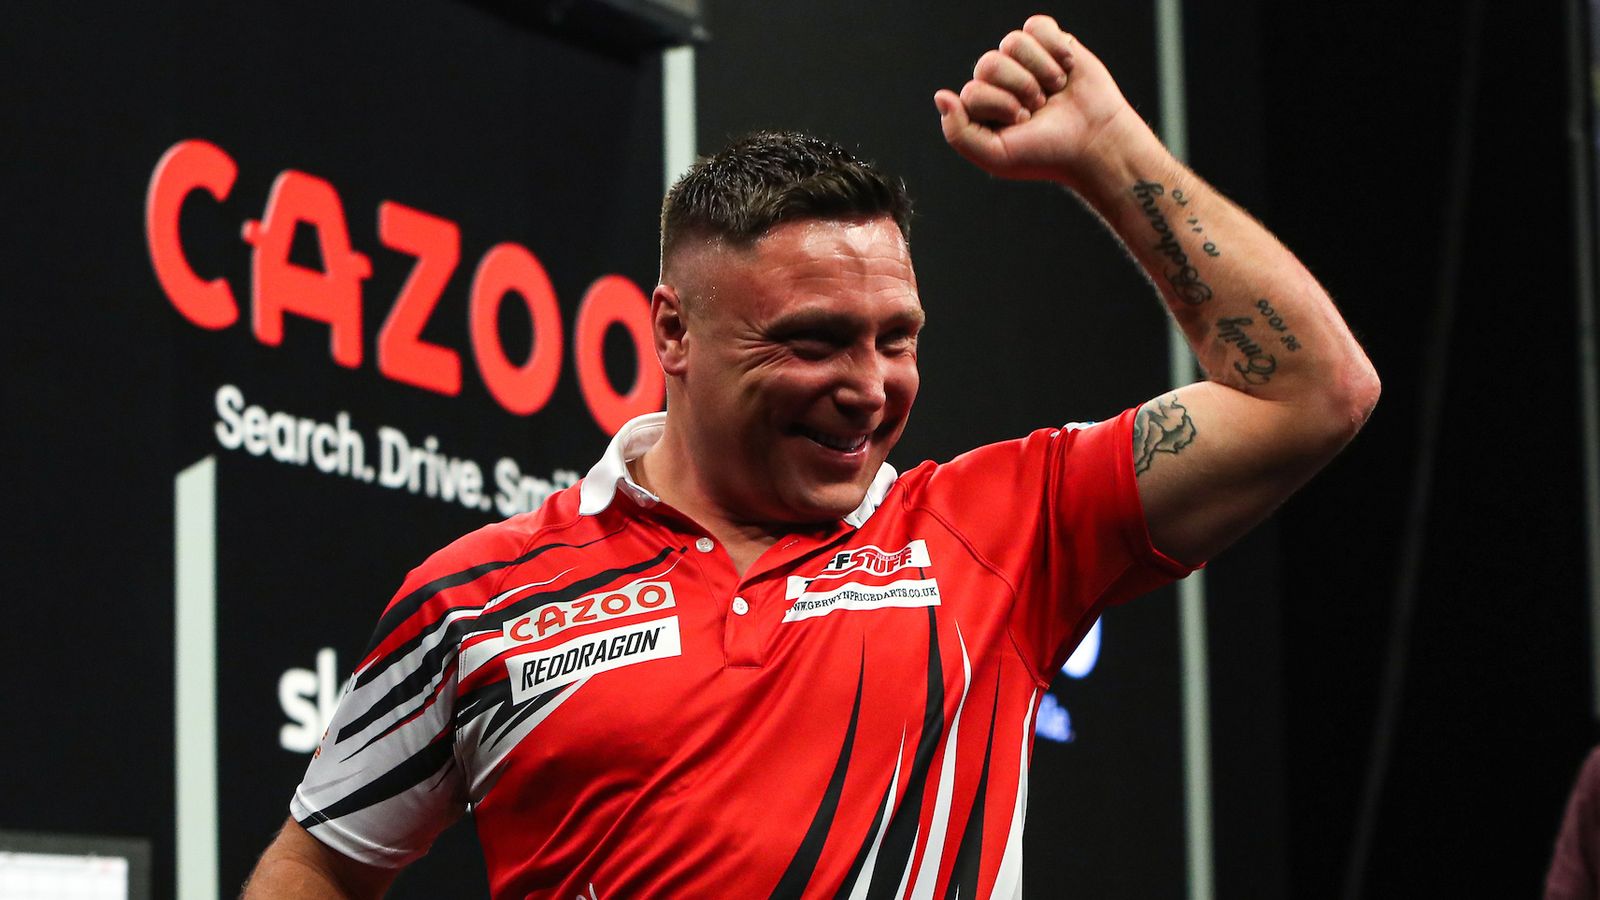 Premier League Darts: Gerwyn Price defeats Michael van Gerwen and Nathan Aspinall to win in Cardiff | Darts News